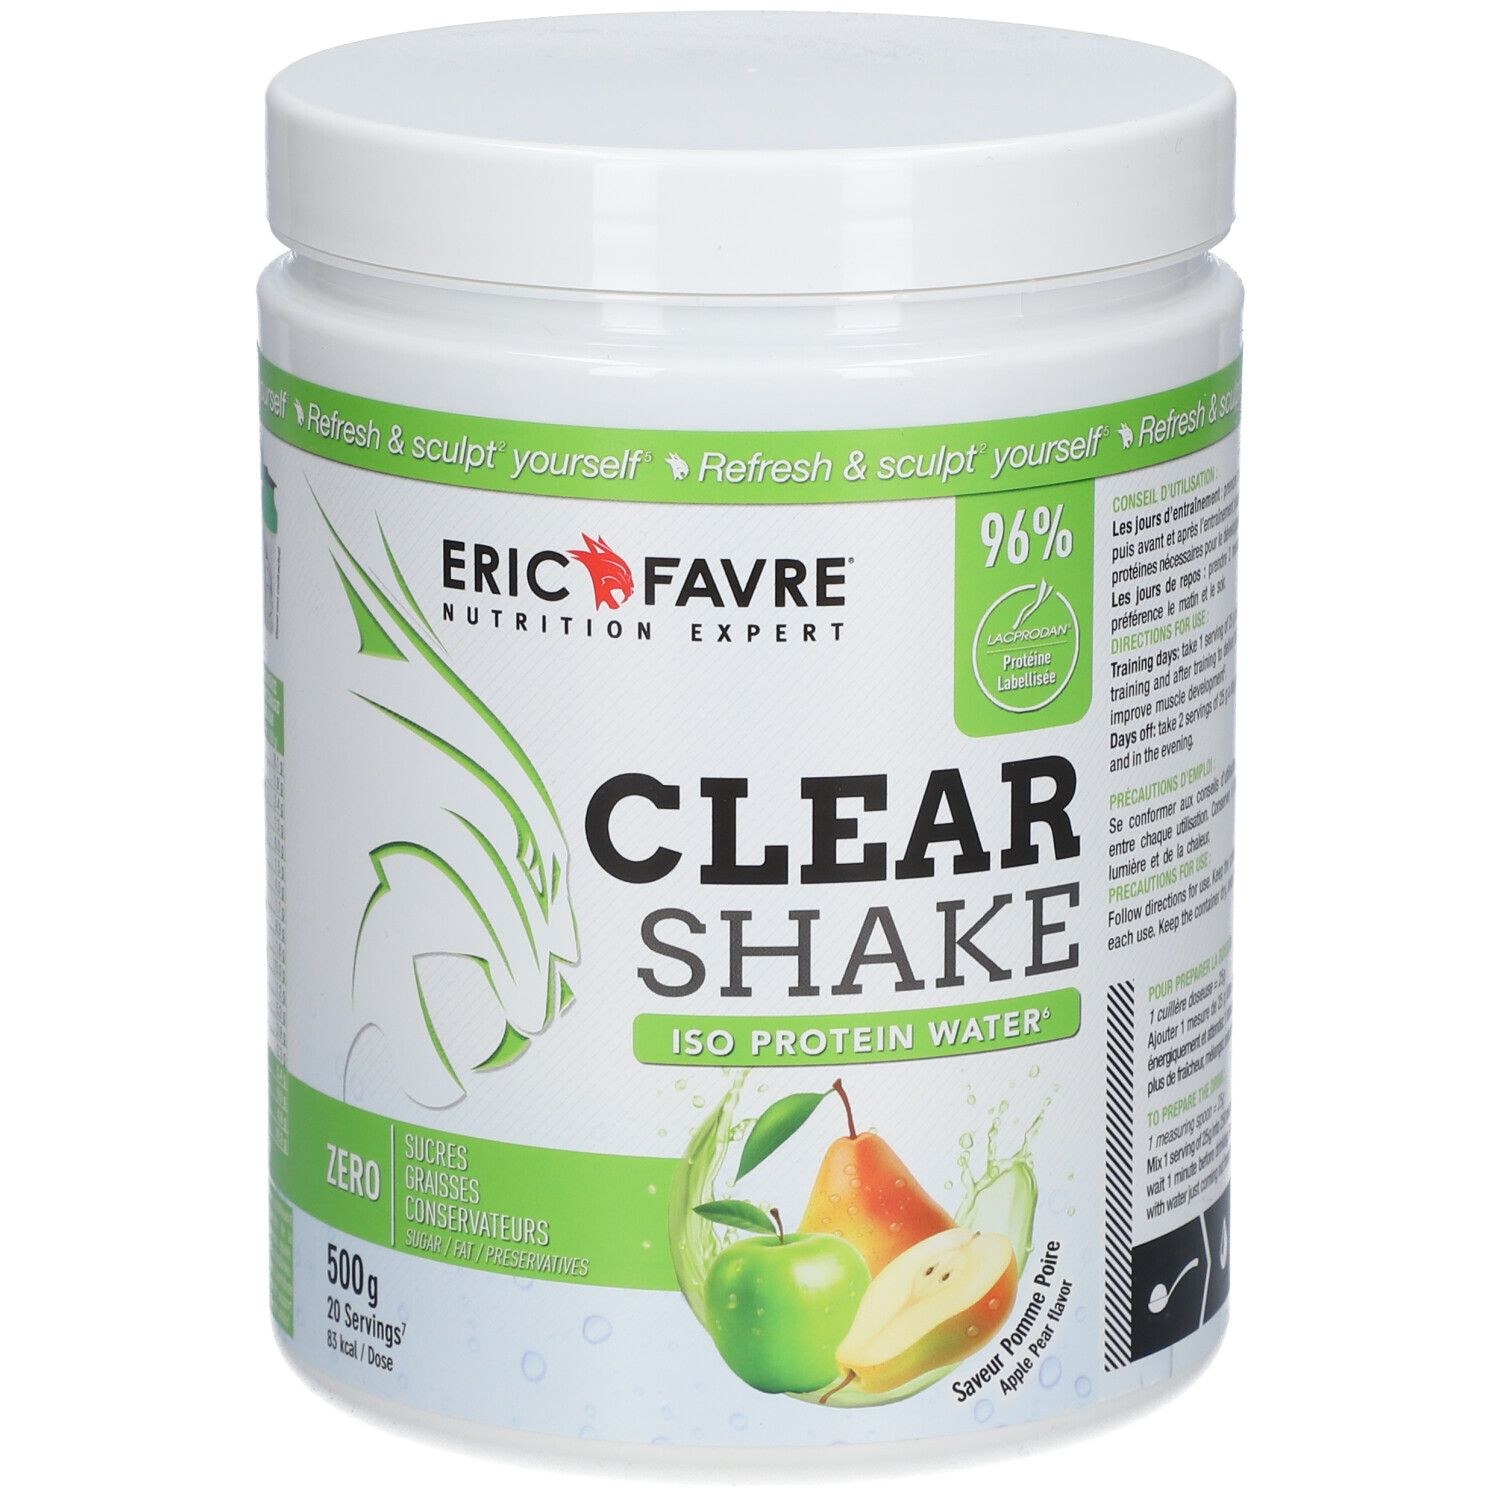 Eric Favre Clear Shake - Iso Protein Water Saveur Pomme-Poire